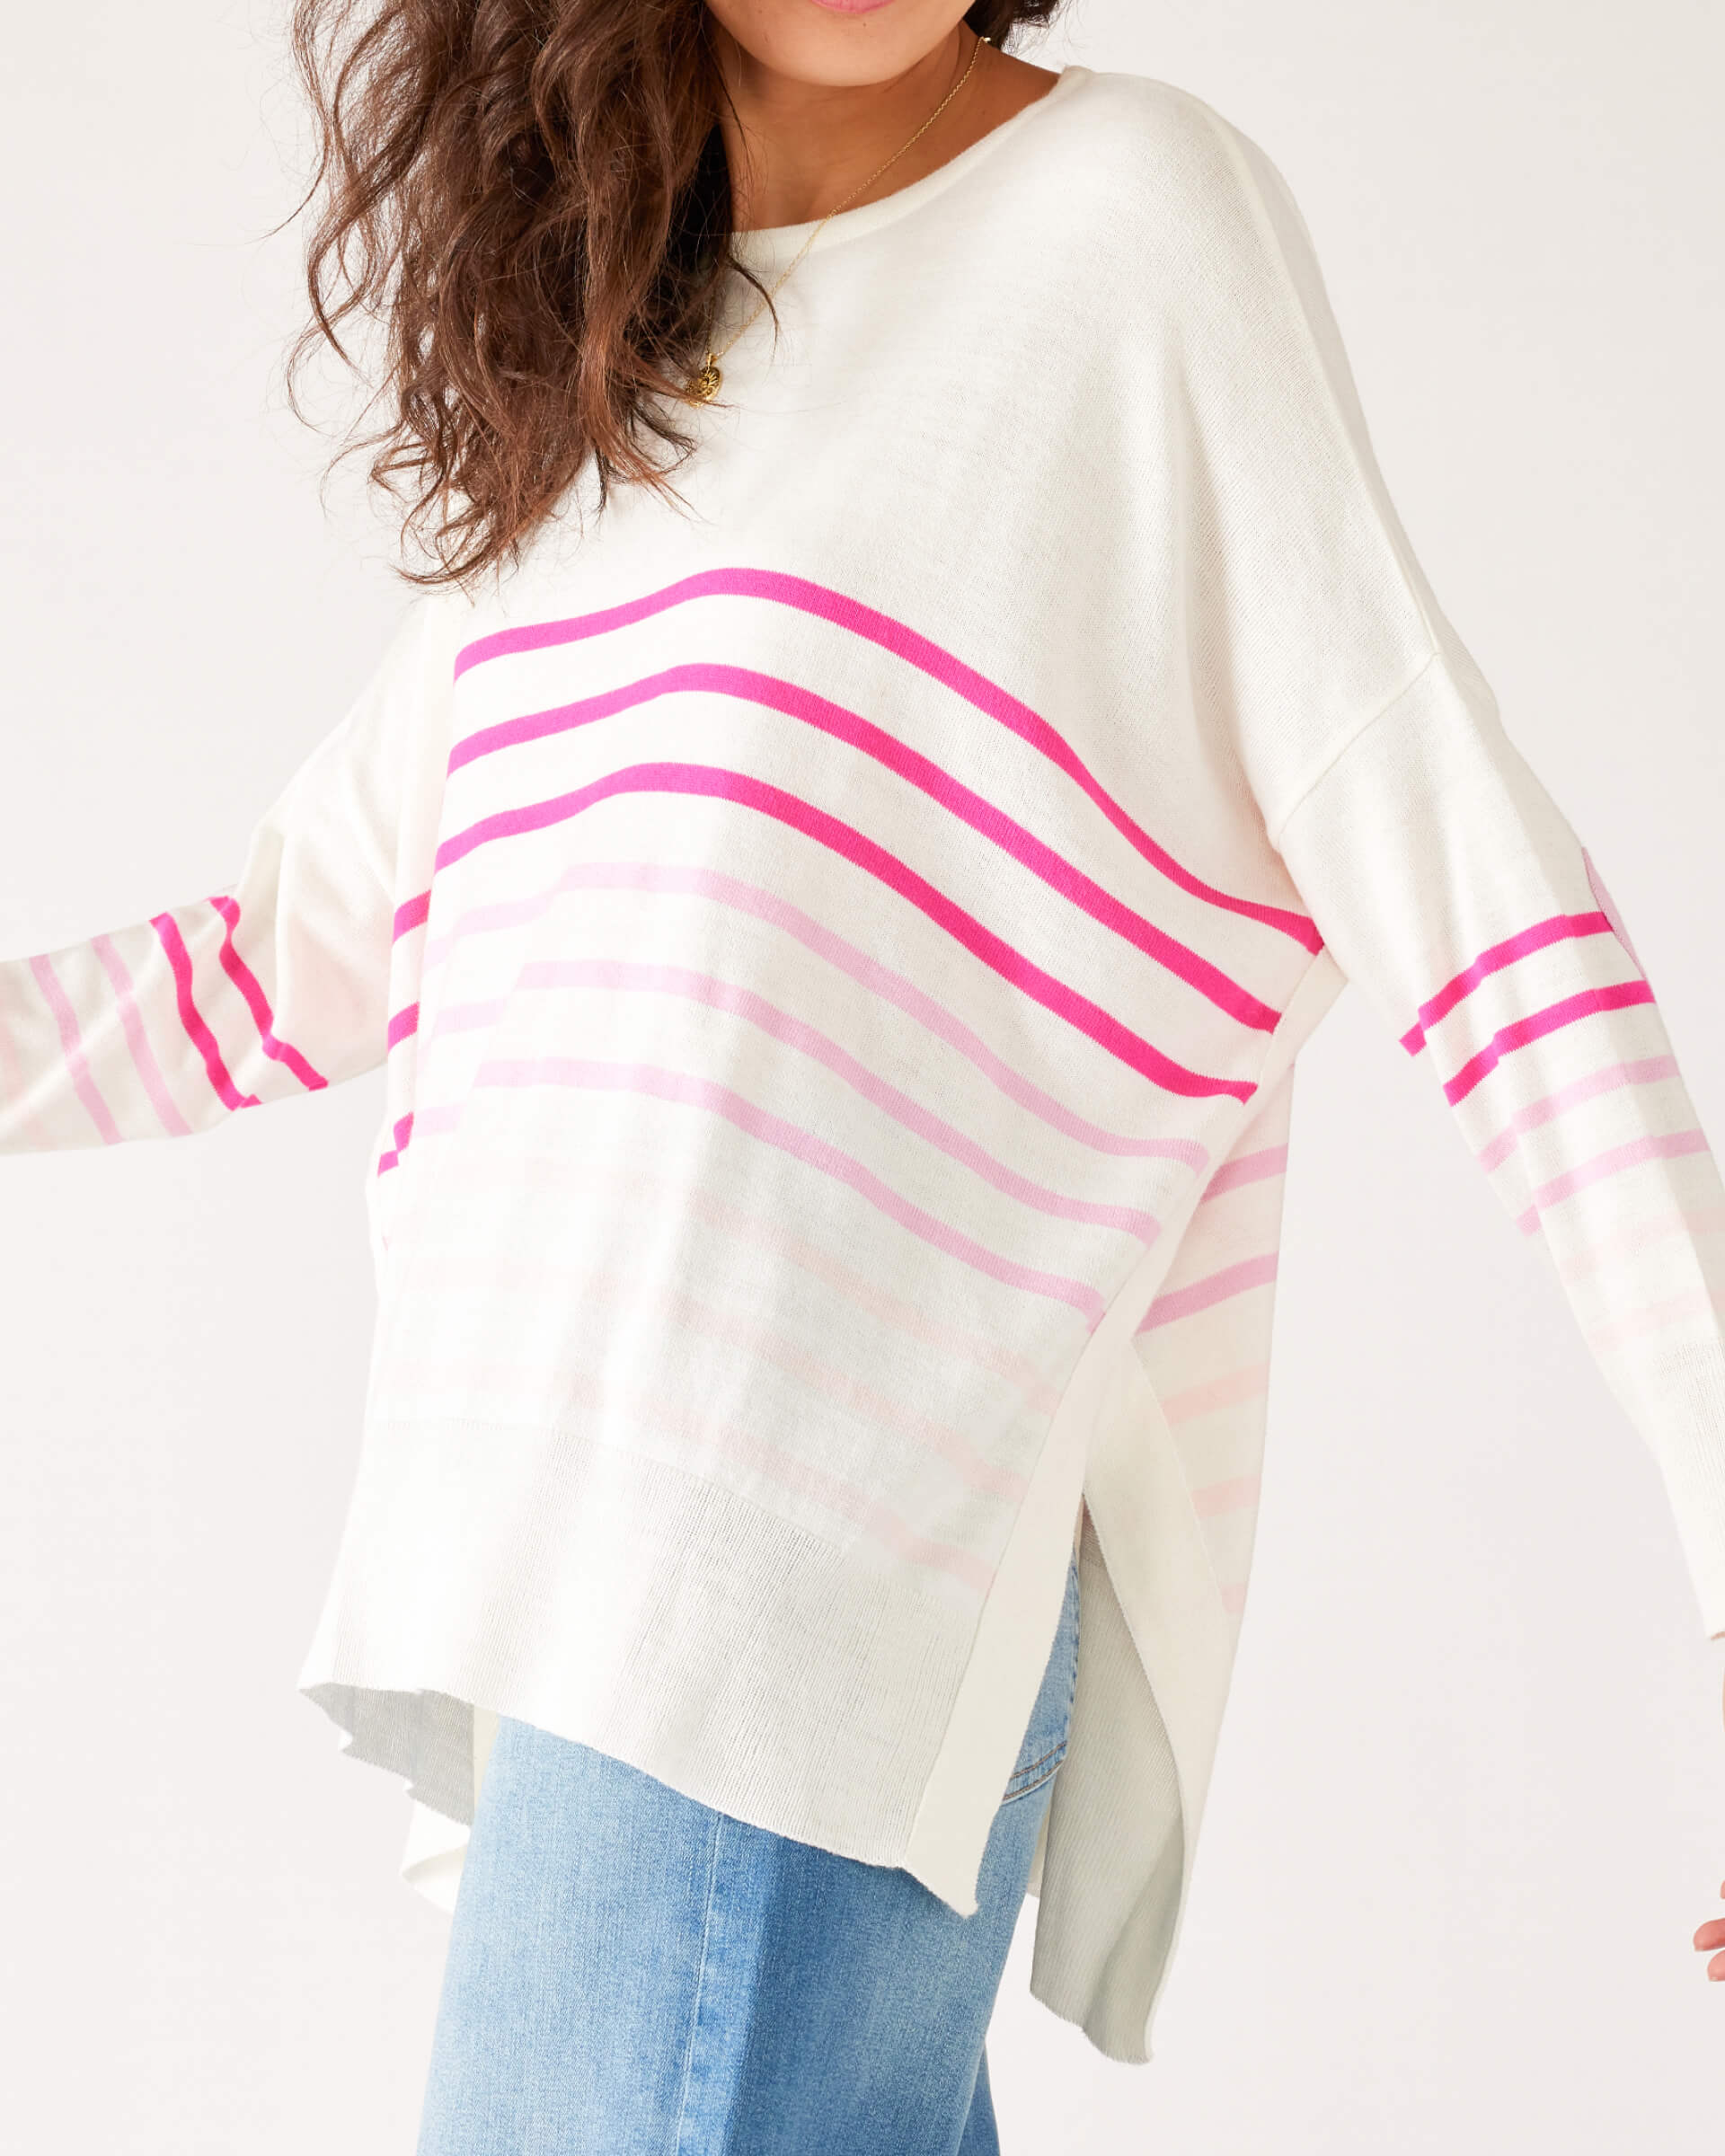 Women's One Size Pink Striped Sweater with Pink Hearts on Sleeve Side View Drape of Fabric